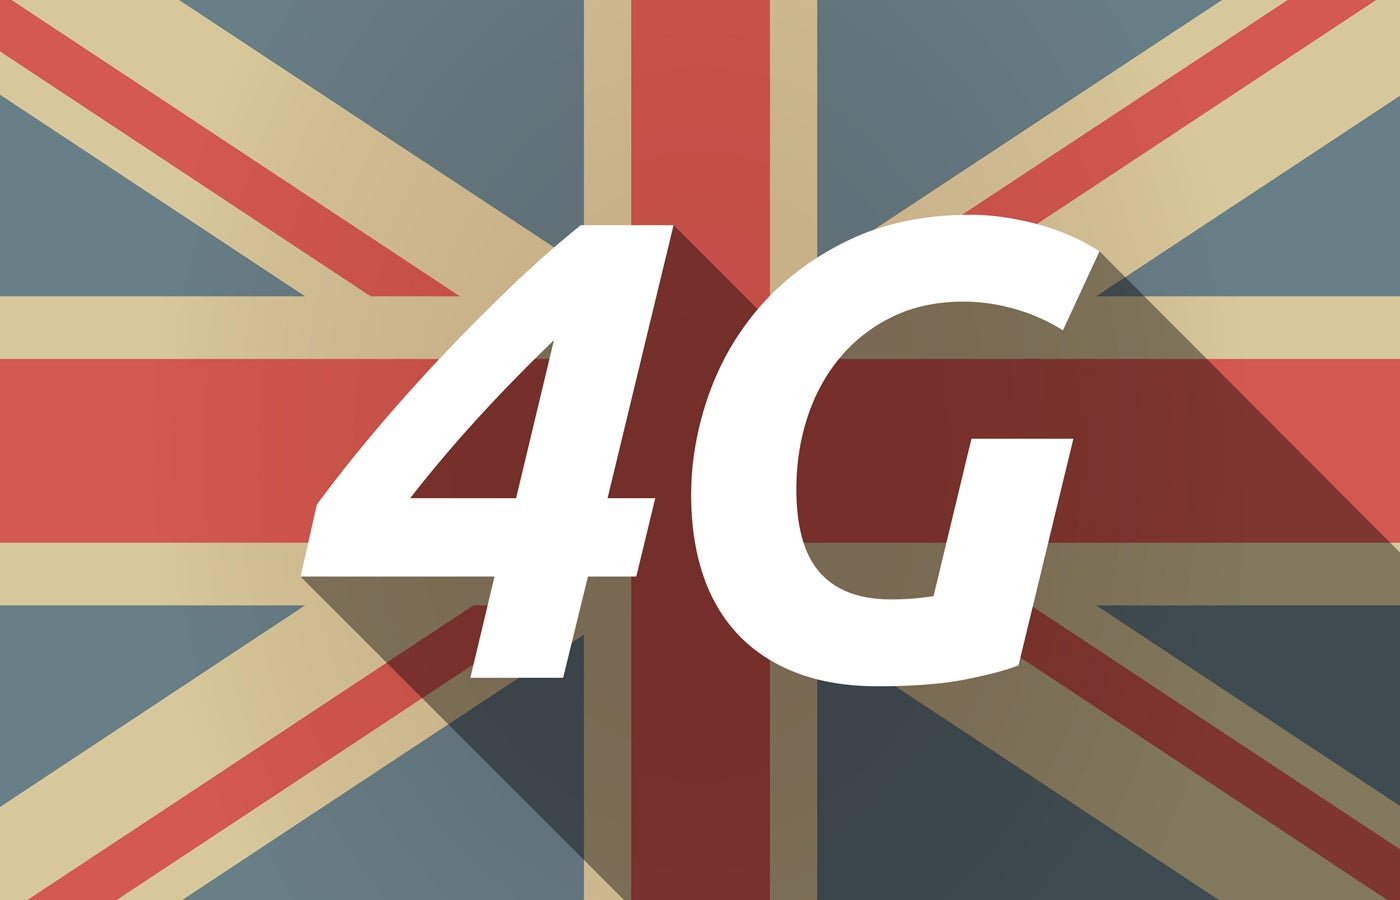 4G “Unlikely” to be Extended to 95% of U.K. by End of 2025